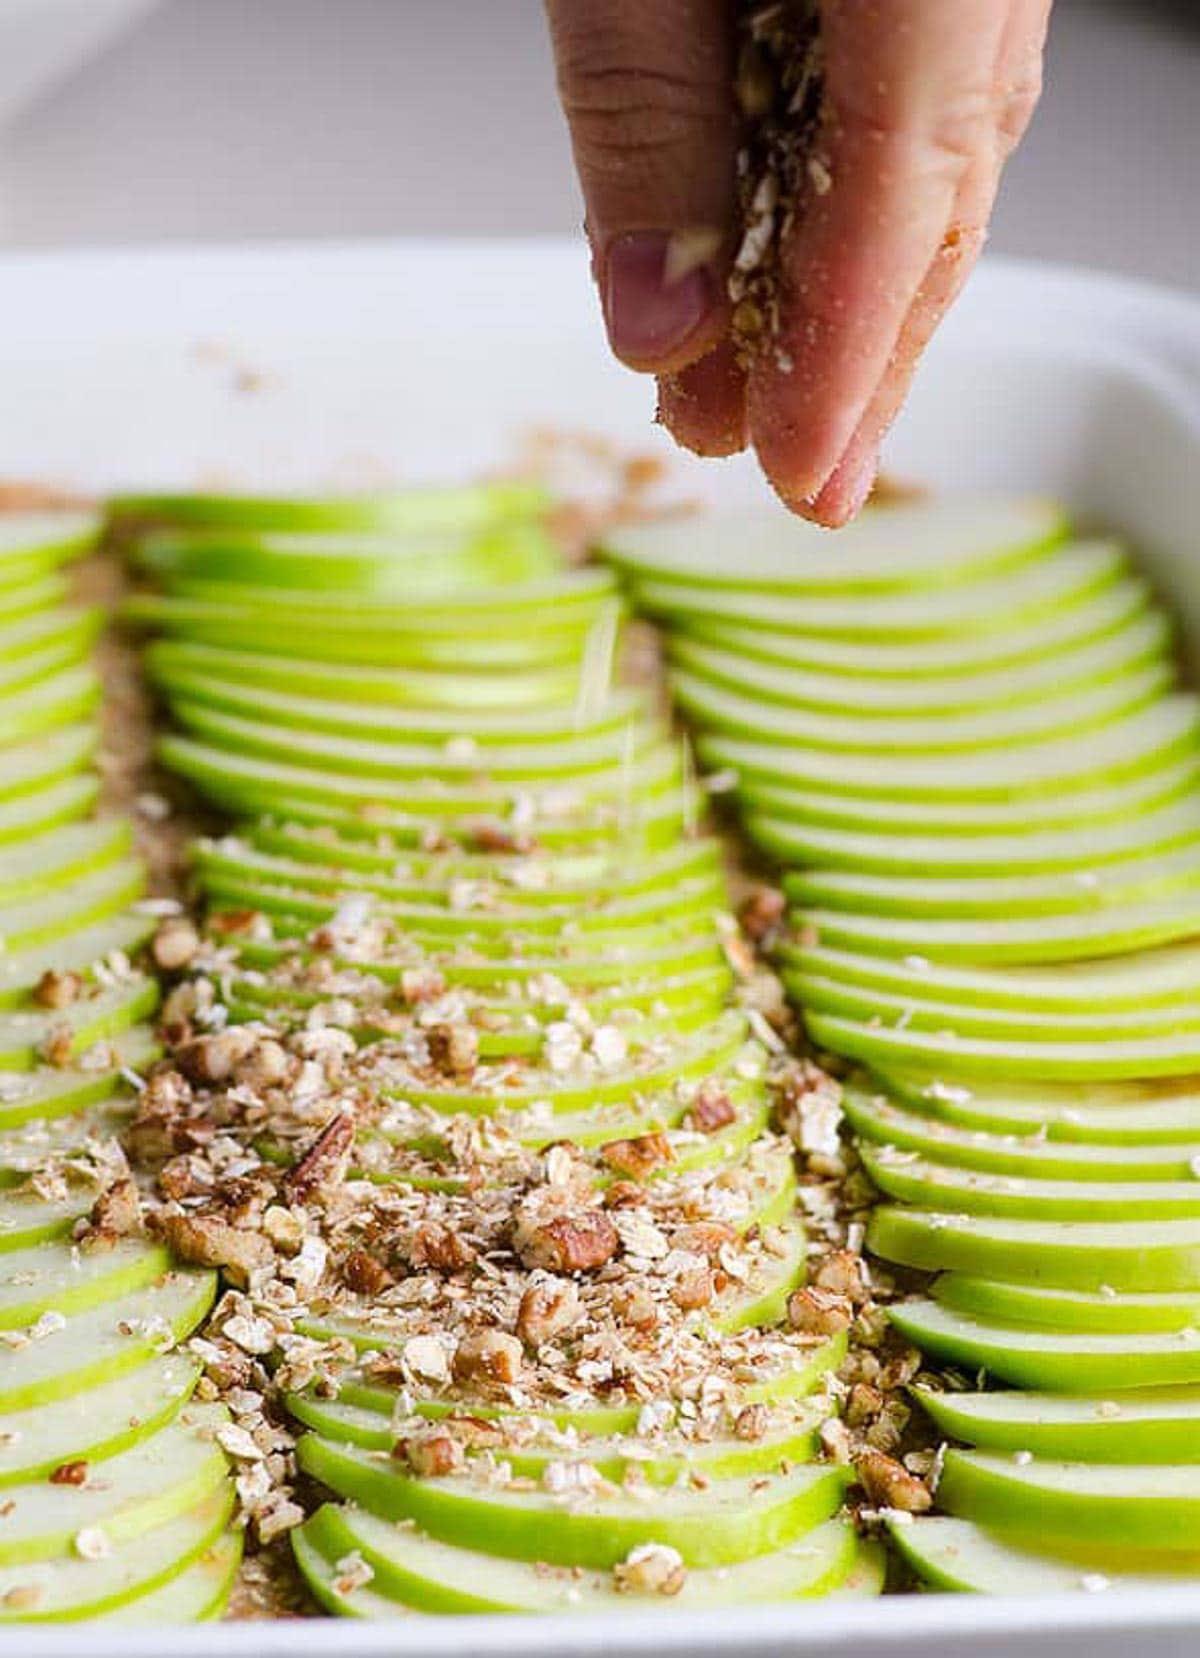 Sprinkling crumb topping over top of sliced apples.